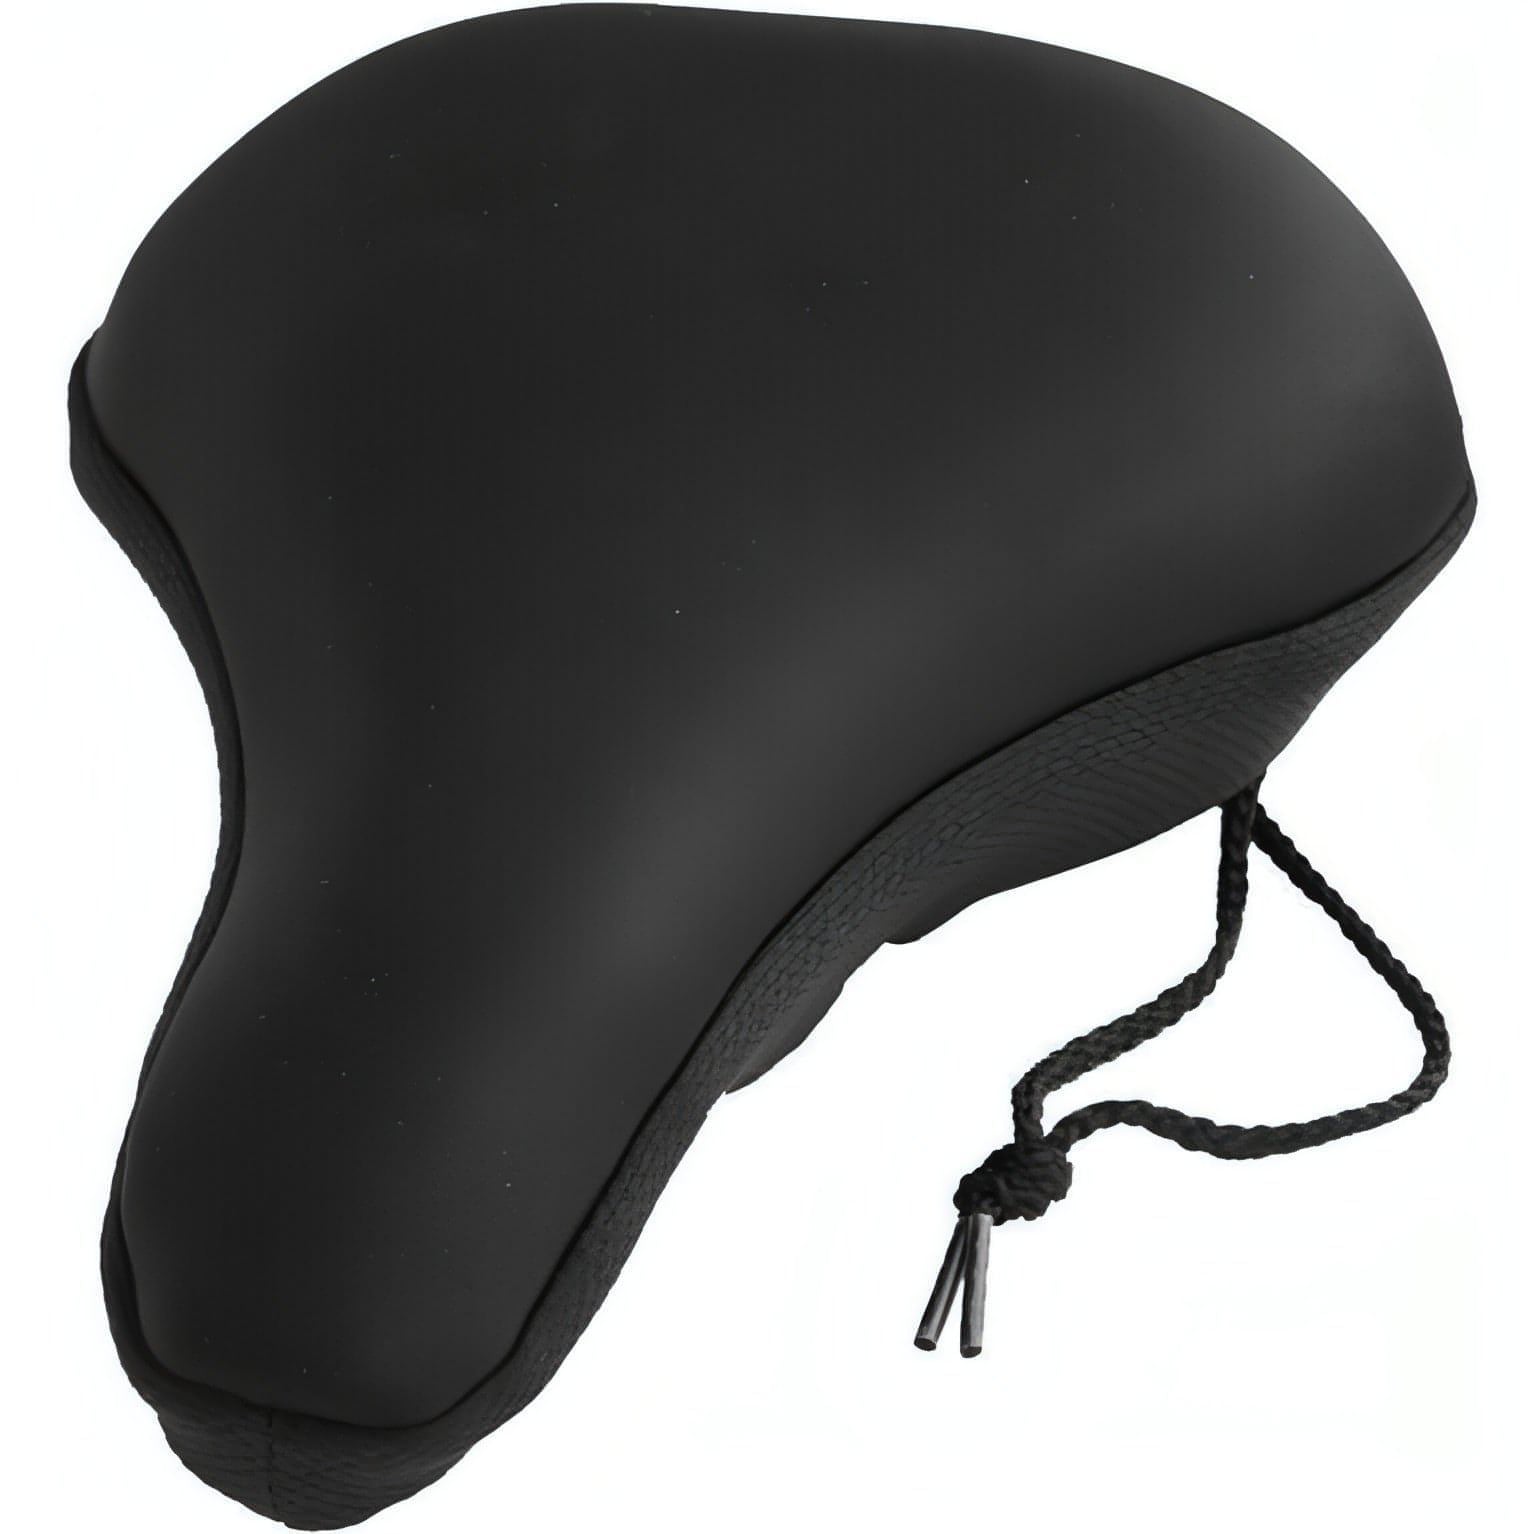 M:Parts Universal Fitting Gel Saddle Cover with Drawstring 5027726292507 - Start Fitness